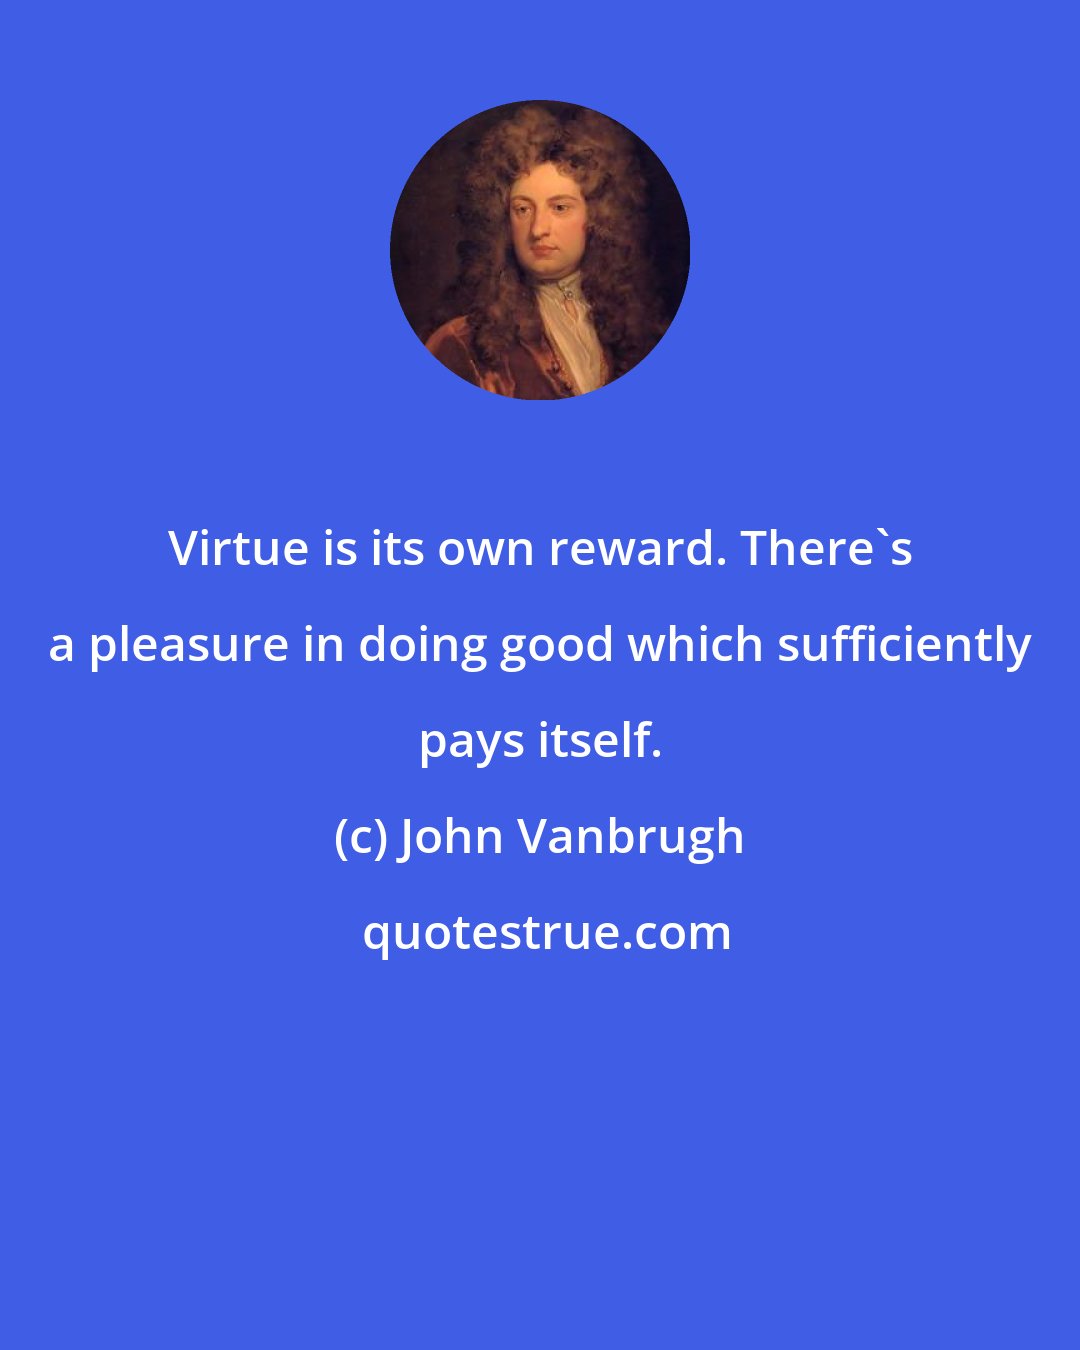 John Vanbrugh: Virtue is its own reward. There's a pleasure in doing good which sufficiently pays itself.